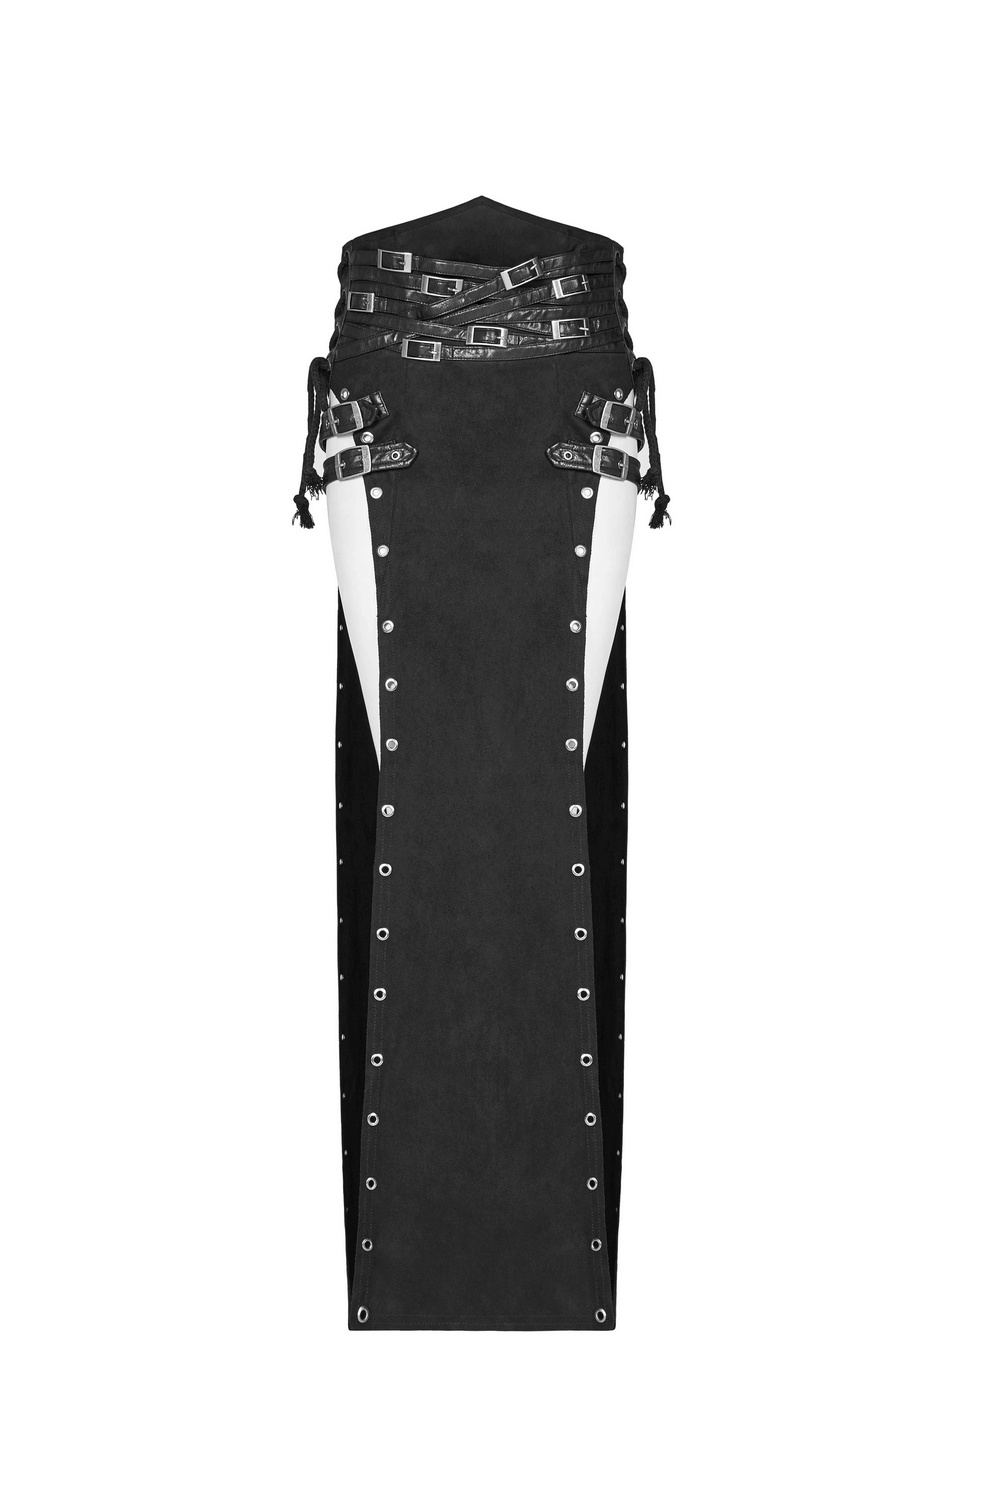 Double-Sided Split Punk Skirt with Metal Eyelets